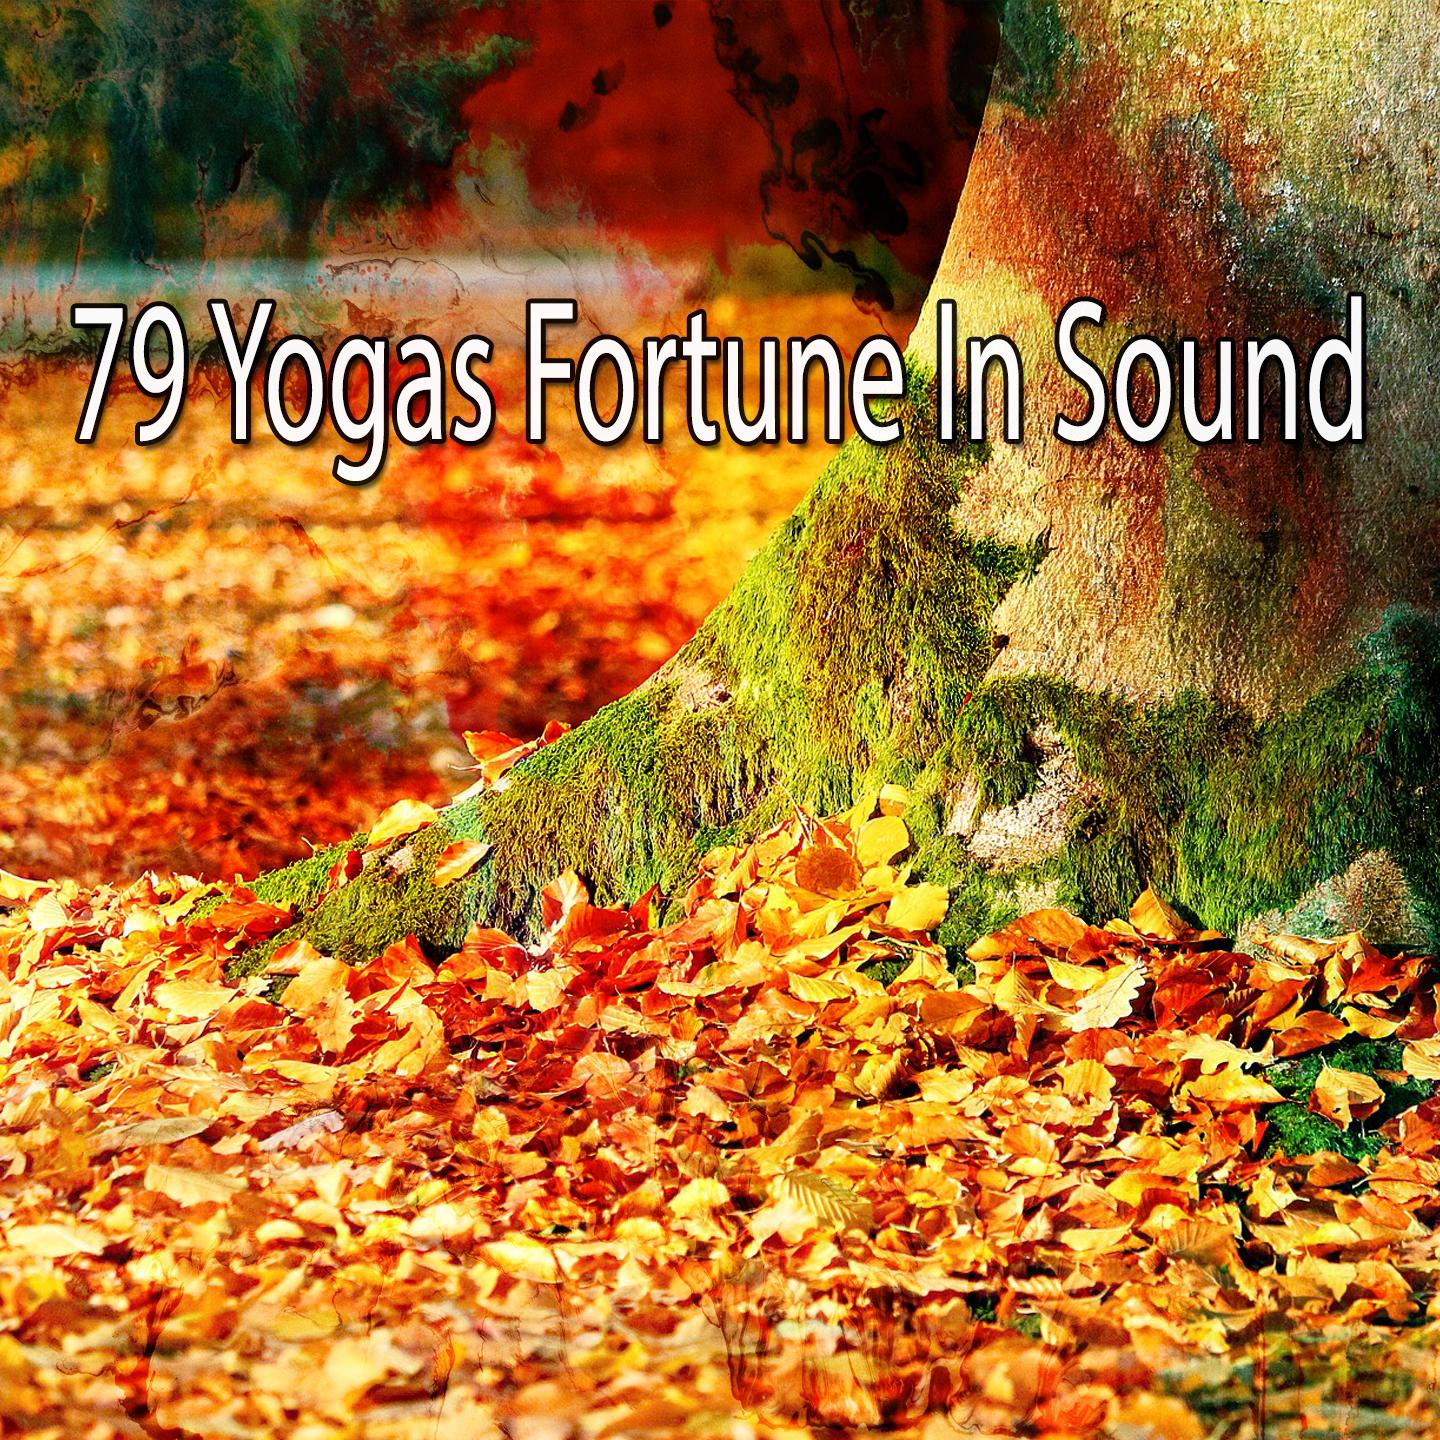 79 Yogas Fortune in Sound